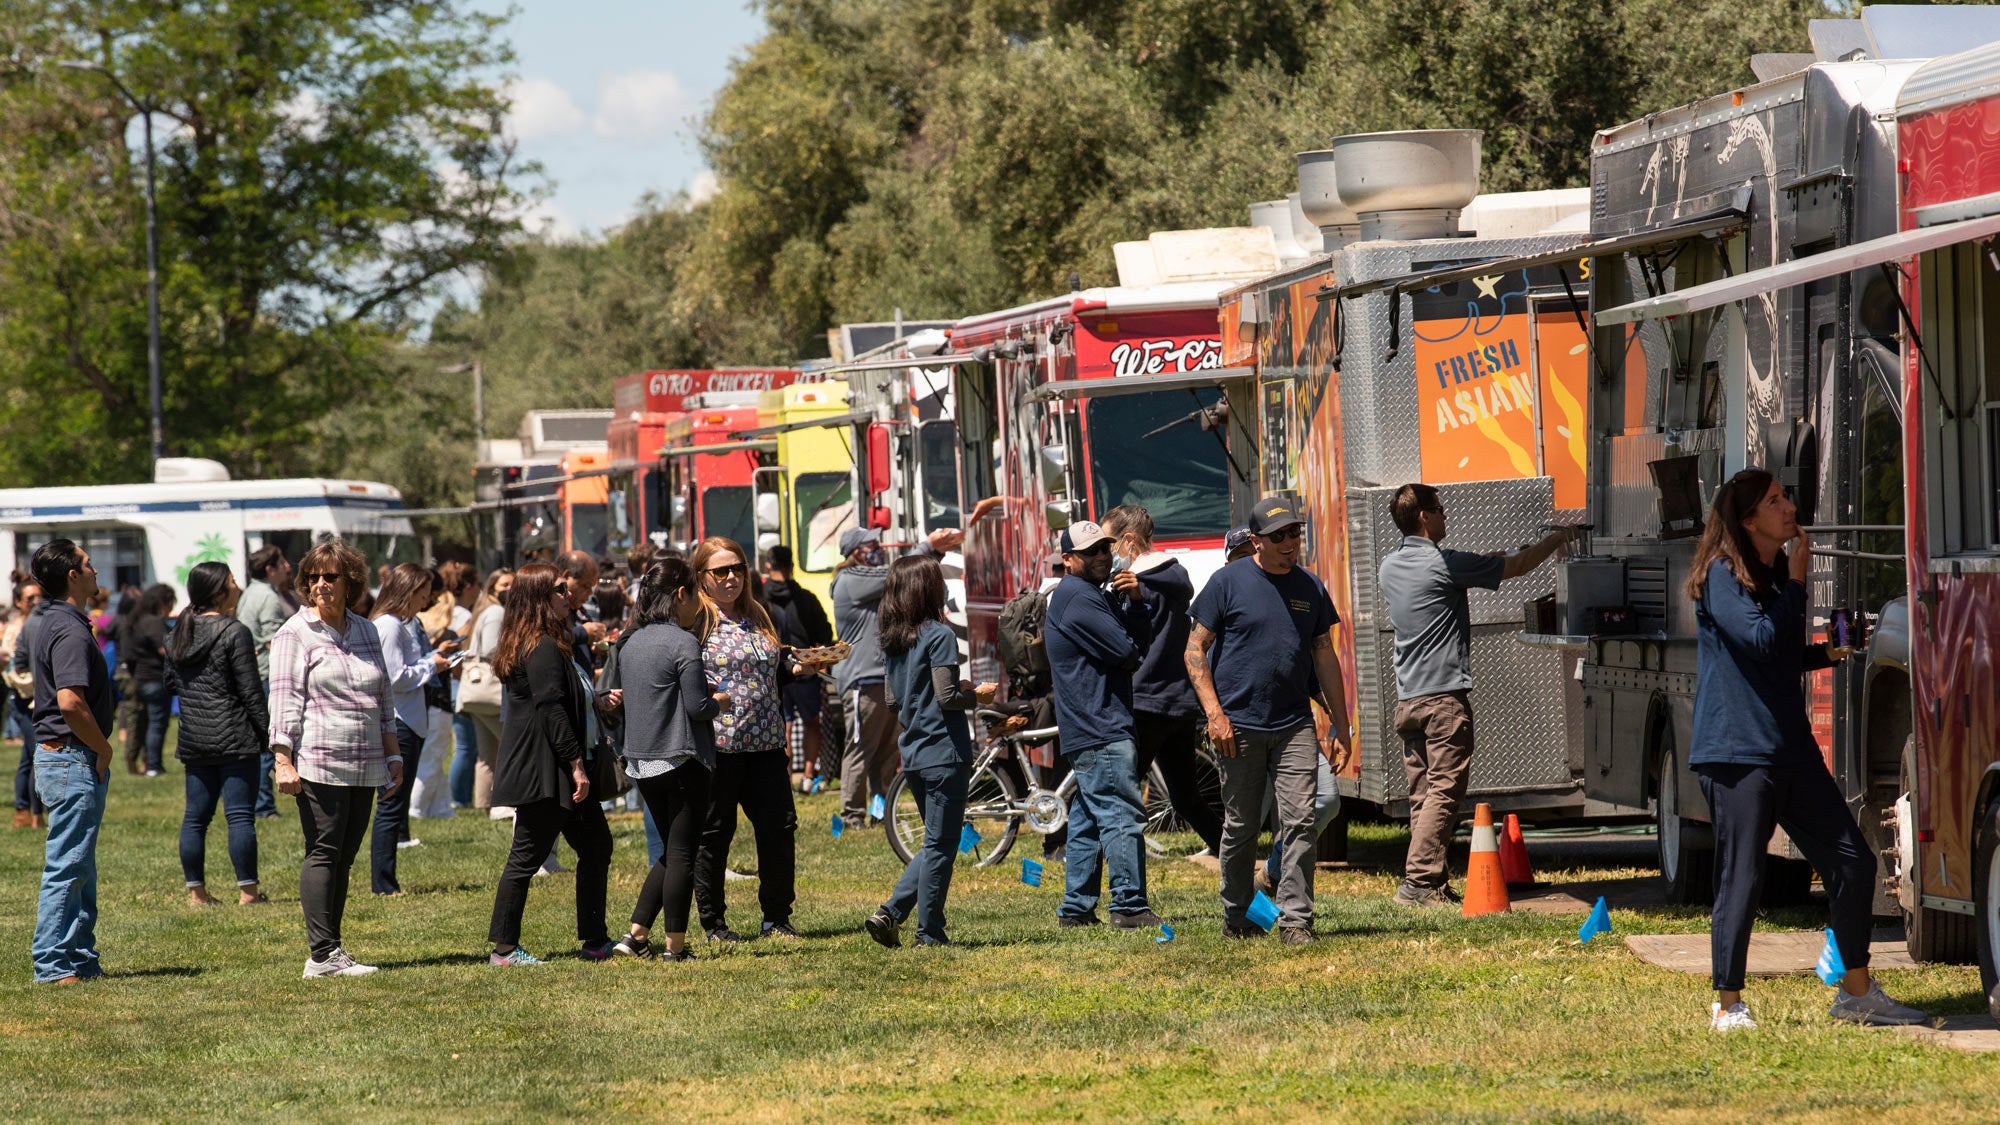 Food trucks lined up on Russell Field, people waiting in lines